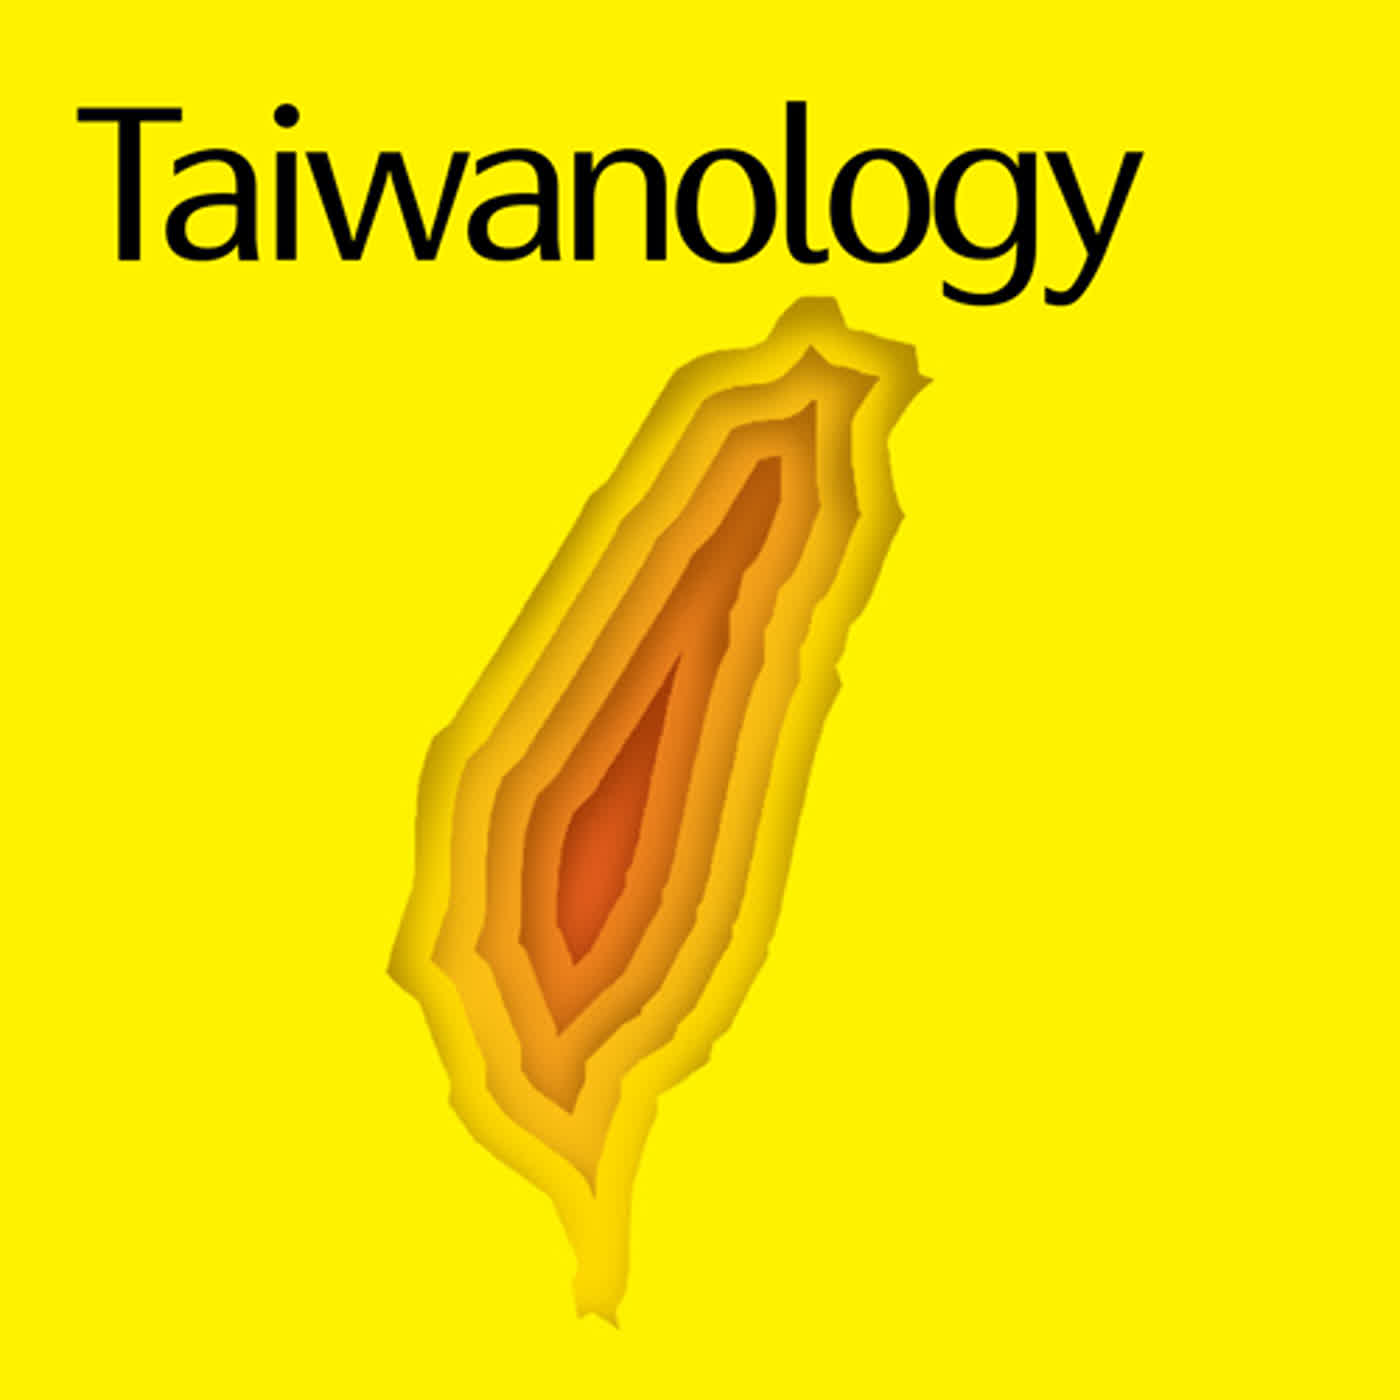 【Taiwanology Ep.19】Taiwan's migrant workers have a dream